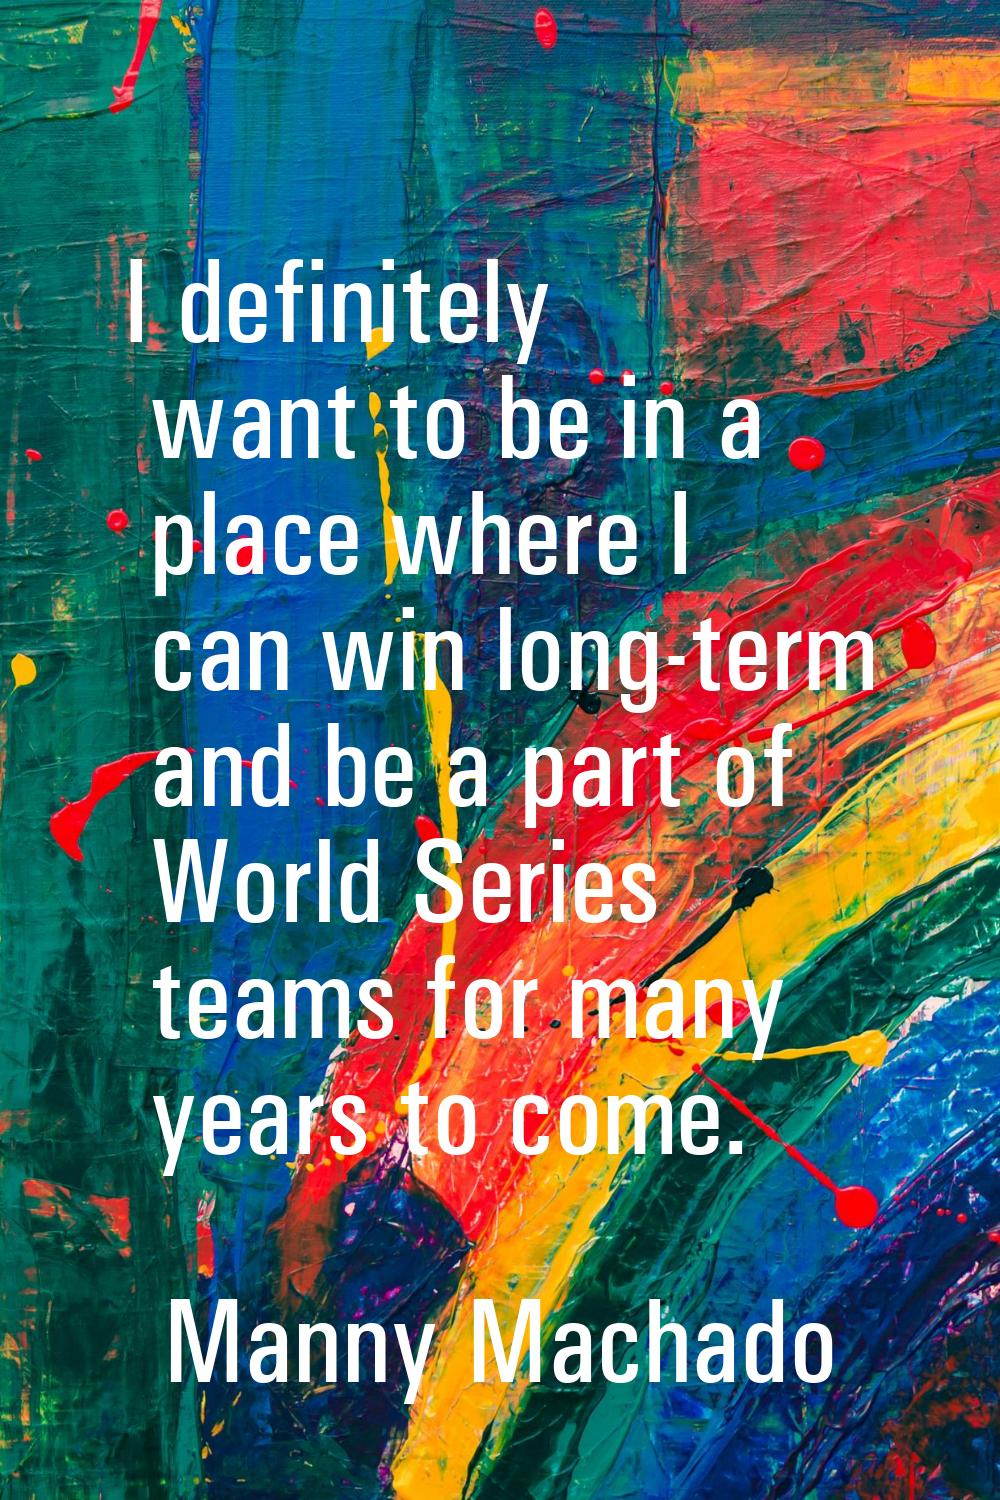 I definitely want to be in a place where I can win long-term and be a part of World Series teams fo